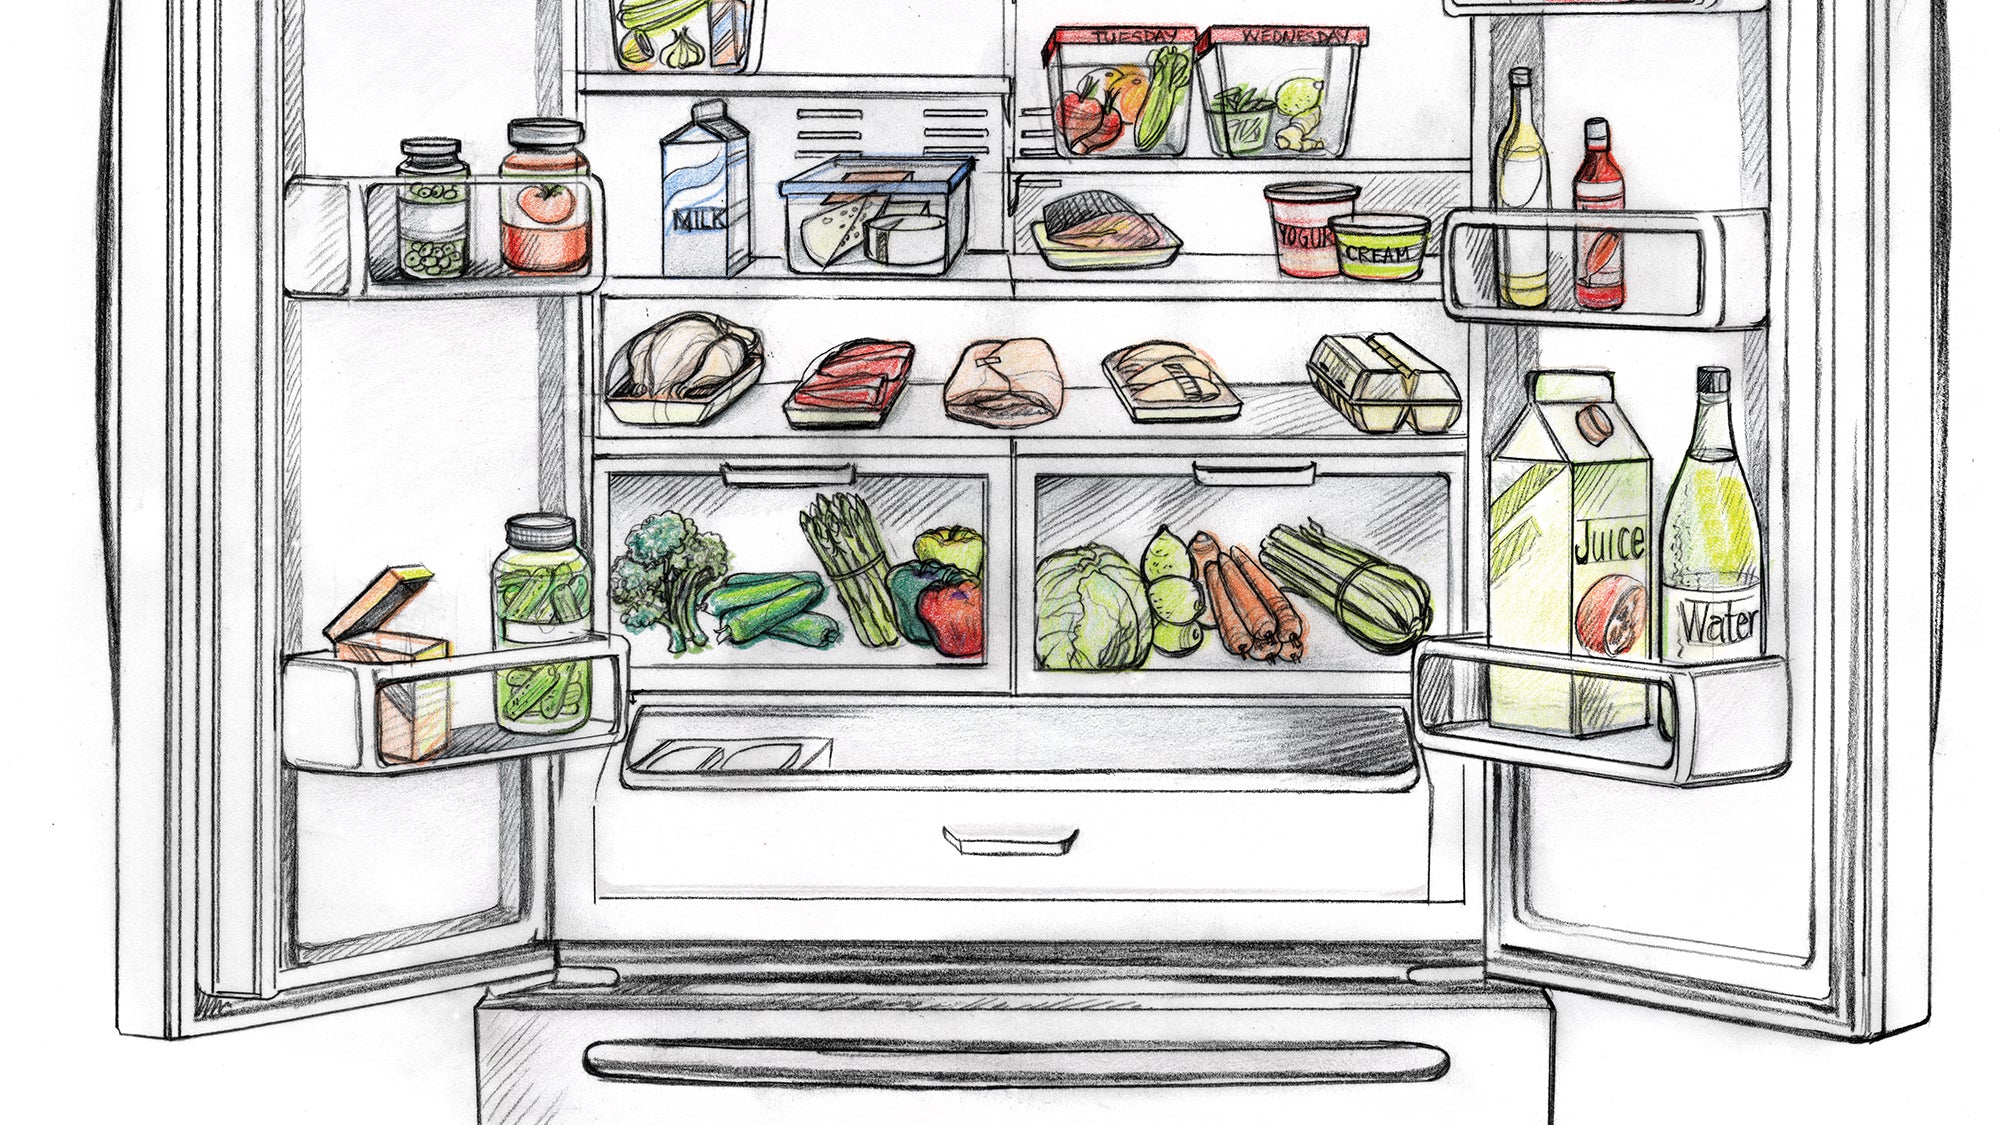 https://cdn.cleaneatingmag.com/wp-content/uploads/2015/01/5-easy-steps-to-your-most-organized-kitchen-ever.jpg